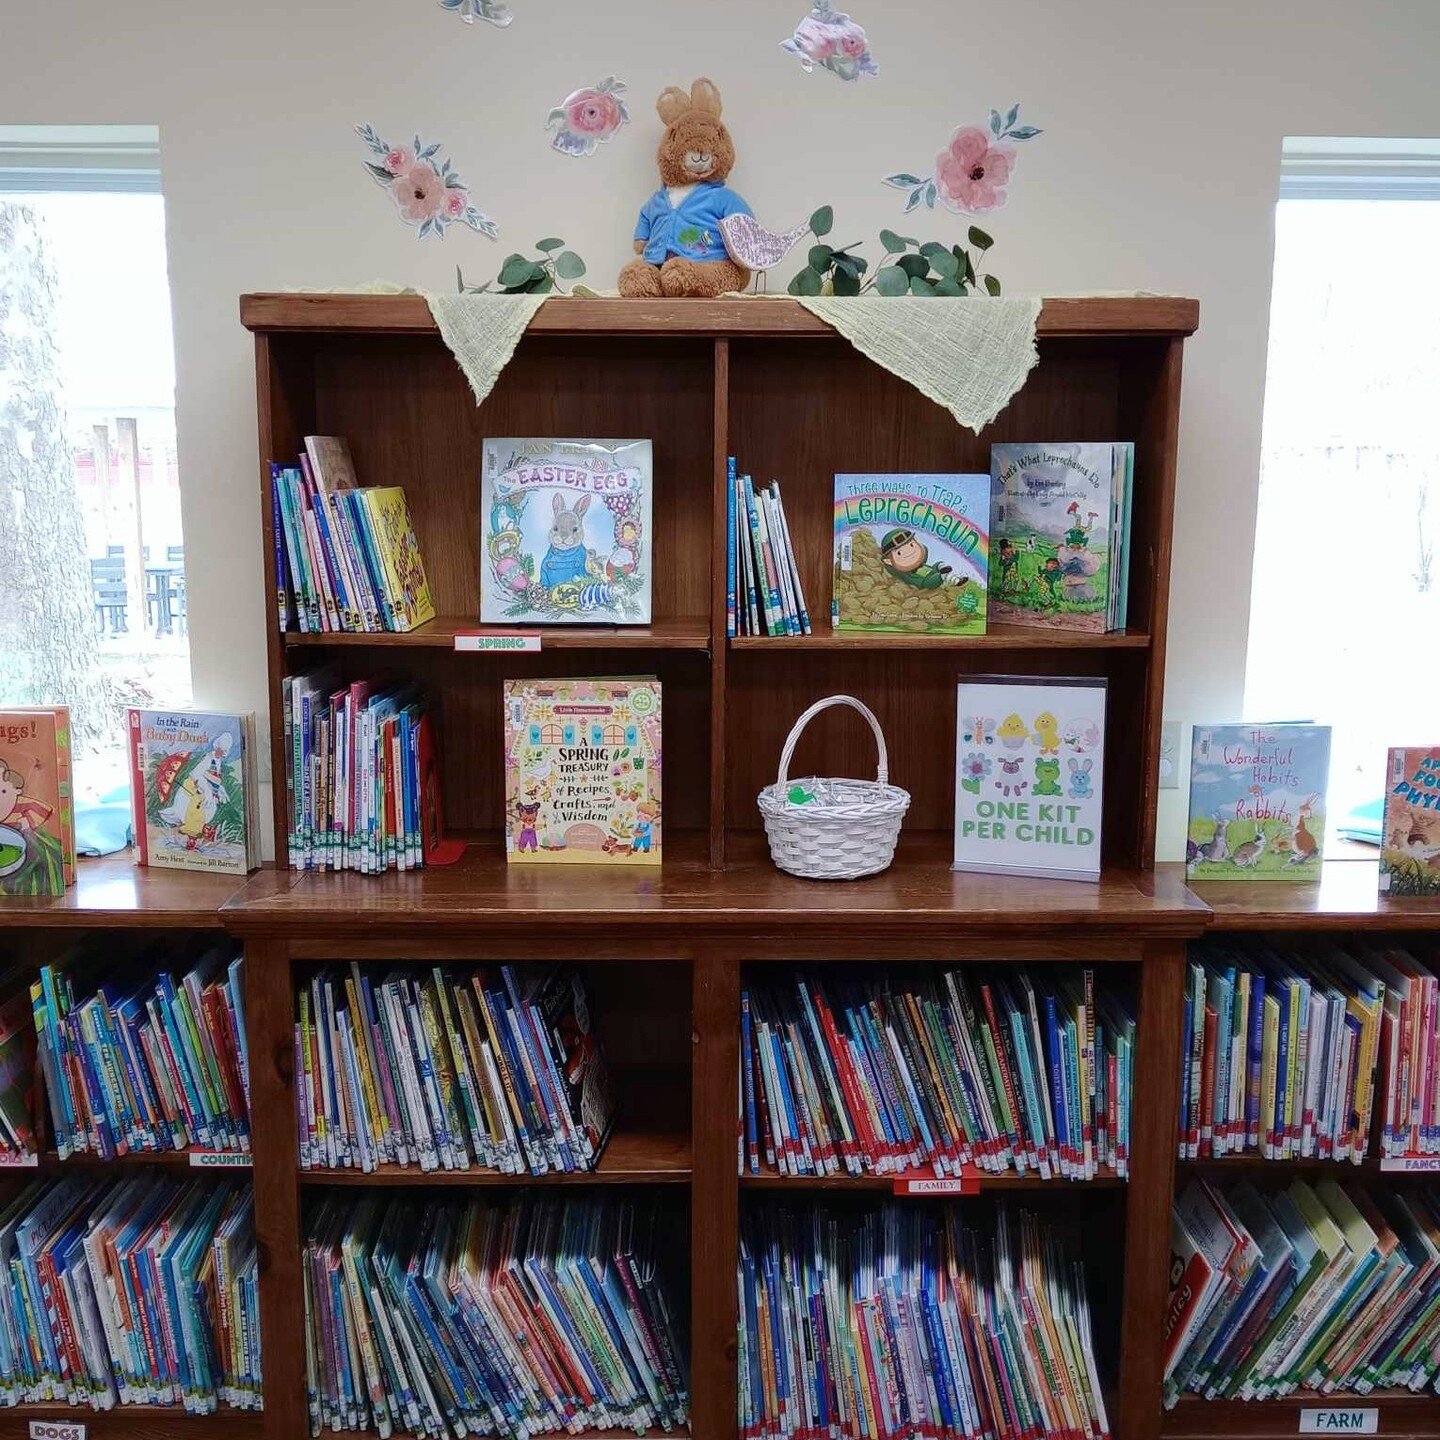 Check out our spring books in the children's section! 🌼

#childrensbooks #childrenslibrary #books #book #read #reading #library #libraries #michiganlibraries #michiganlibrary #bookdisplay #shelfie #shelfies #springbooks